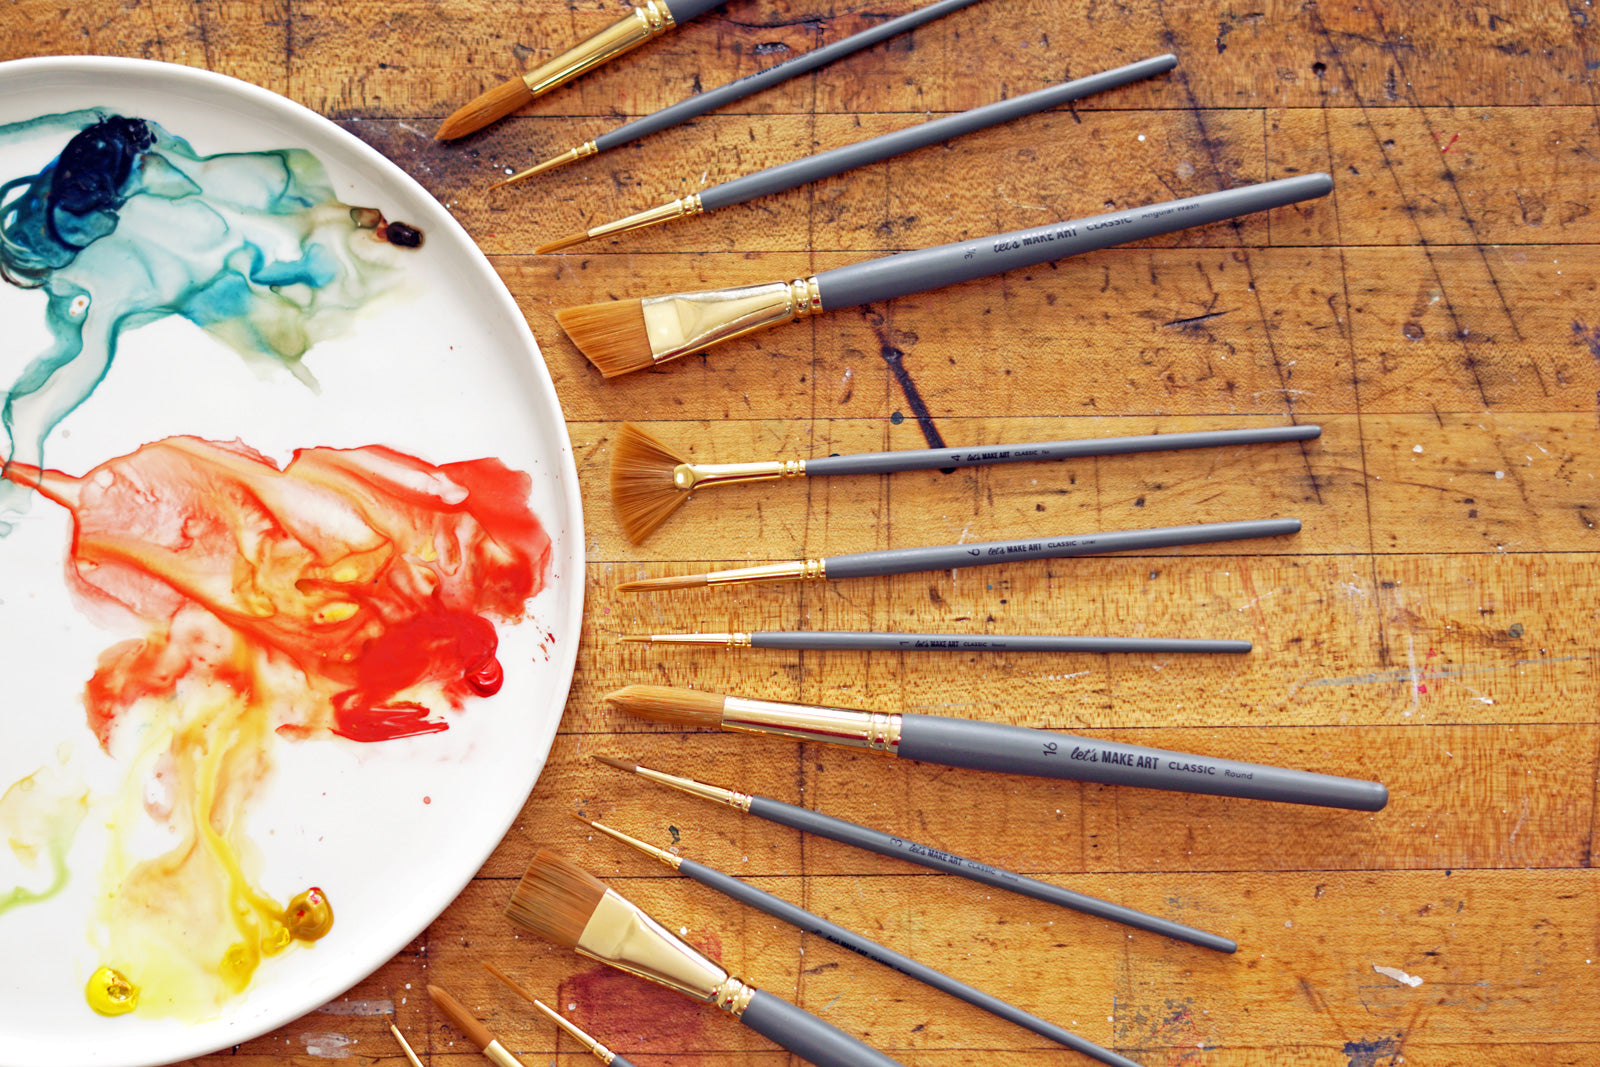 How to Clean Acrylic Paint Brushes: 6 Tips - Fine Art Tutorials